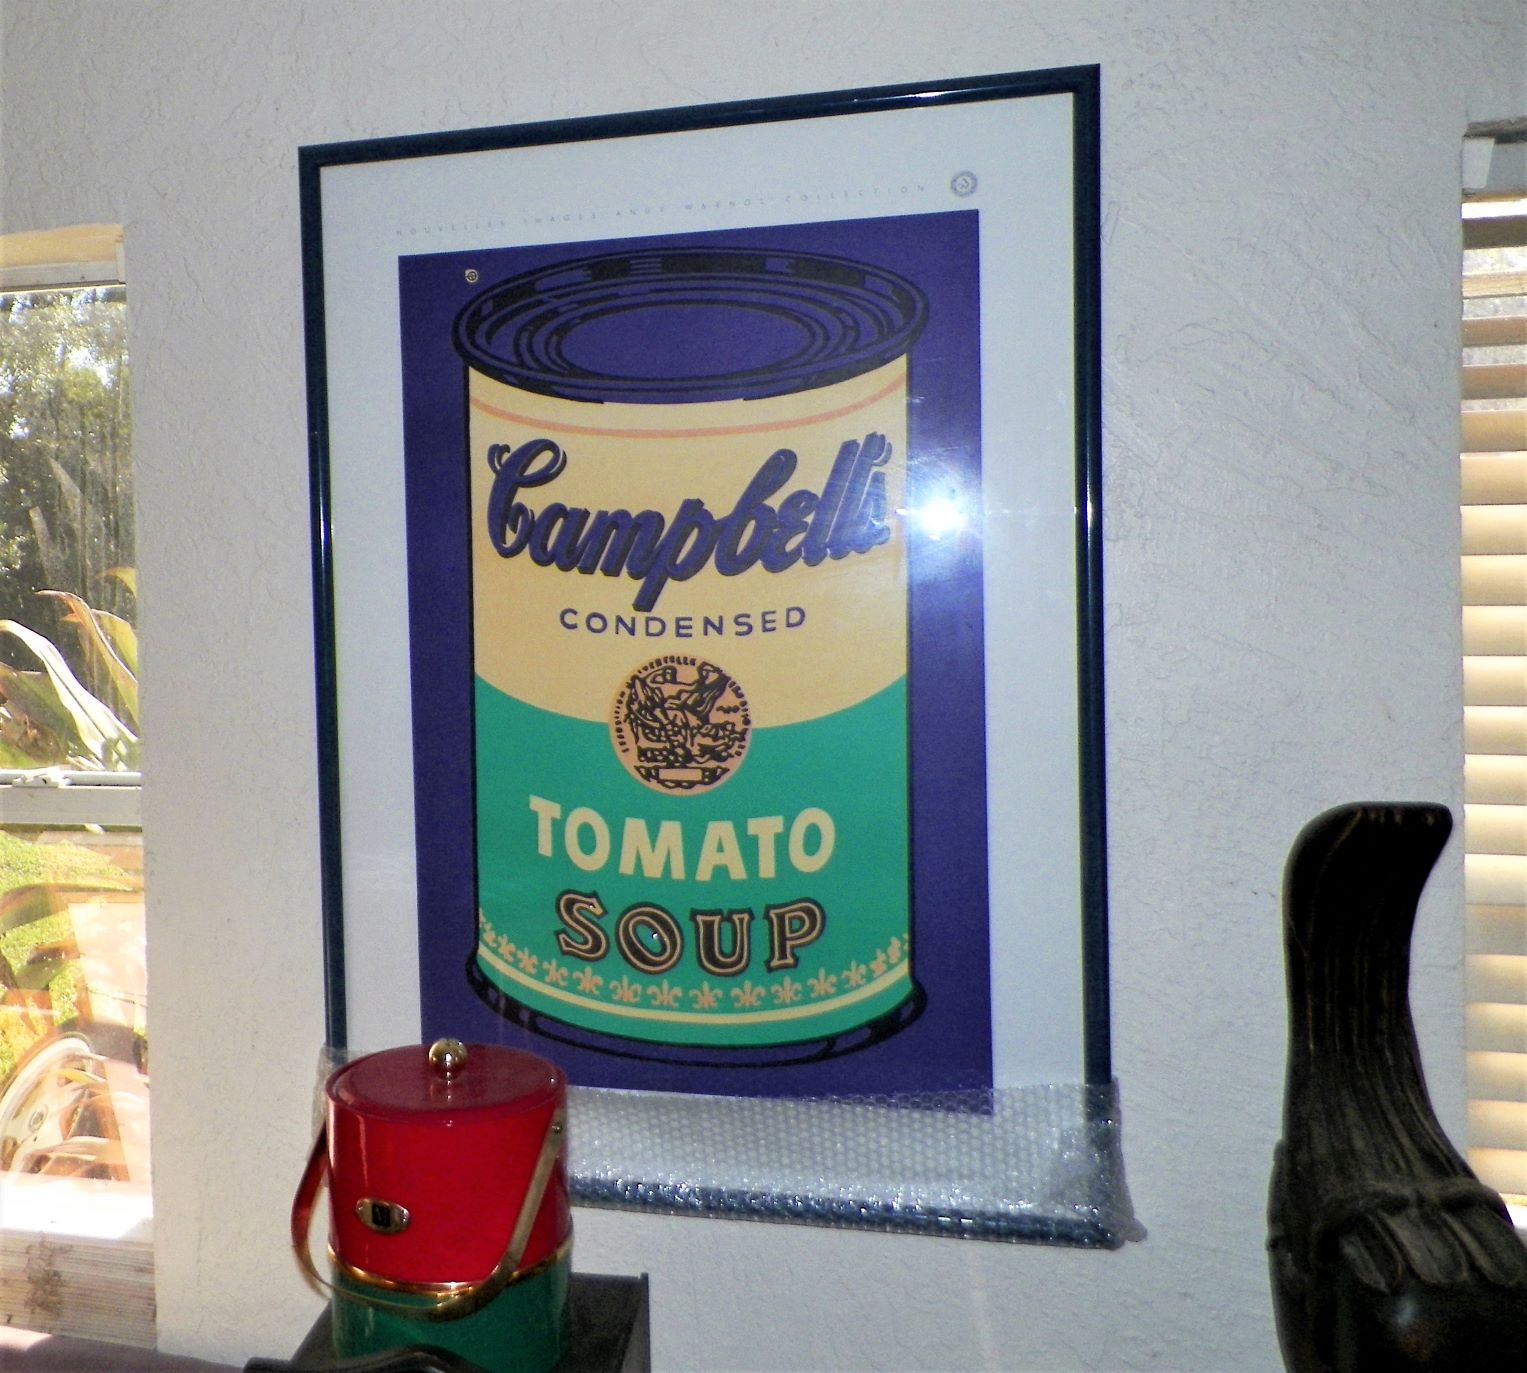 ART PRINT CAMPBELL SOUP CAN ANDY WARHOL FOUNDATION MOUVELLE IMAGES 1A_AA.JPG